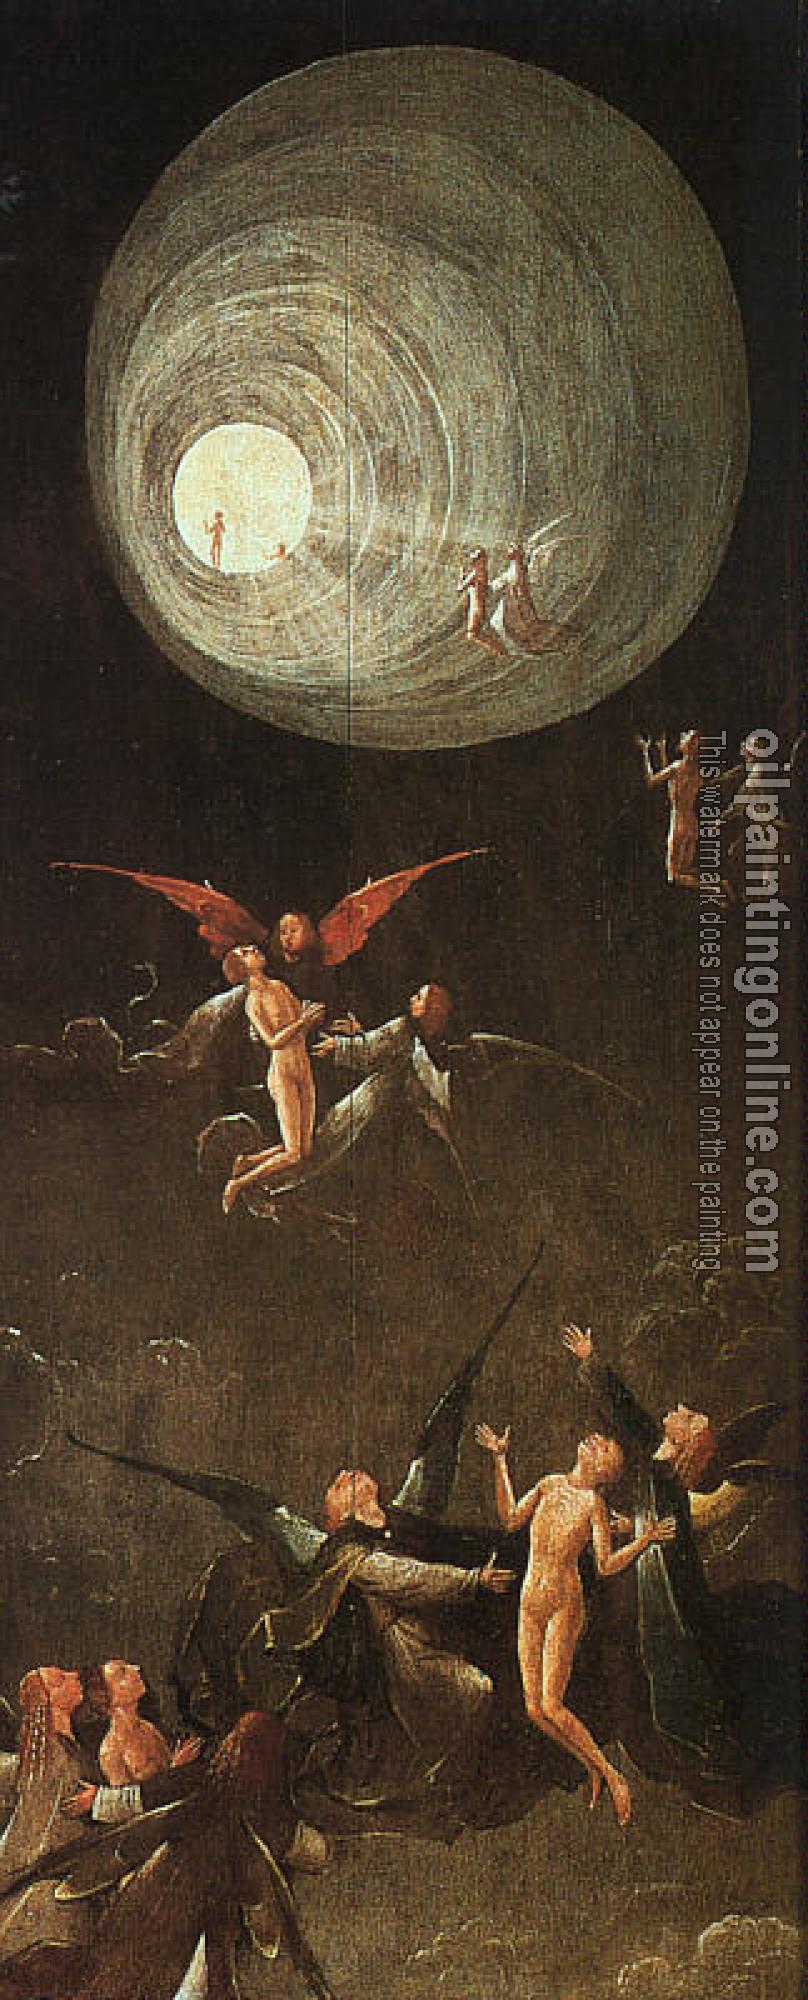 Bosch, Hieronymus - Ascent of the Blessed, from the Paradise and Hell panels normally attributed to Bosch